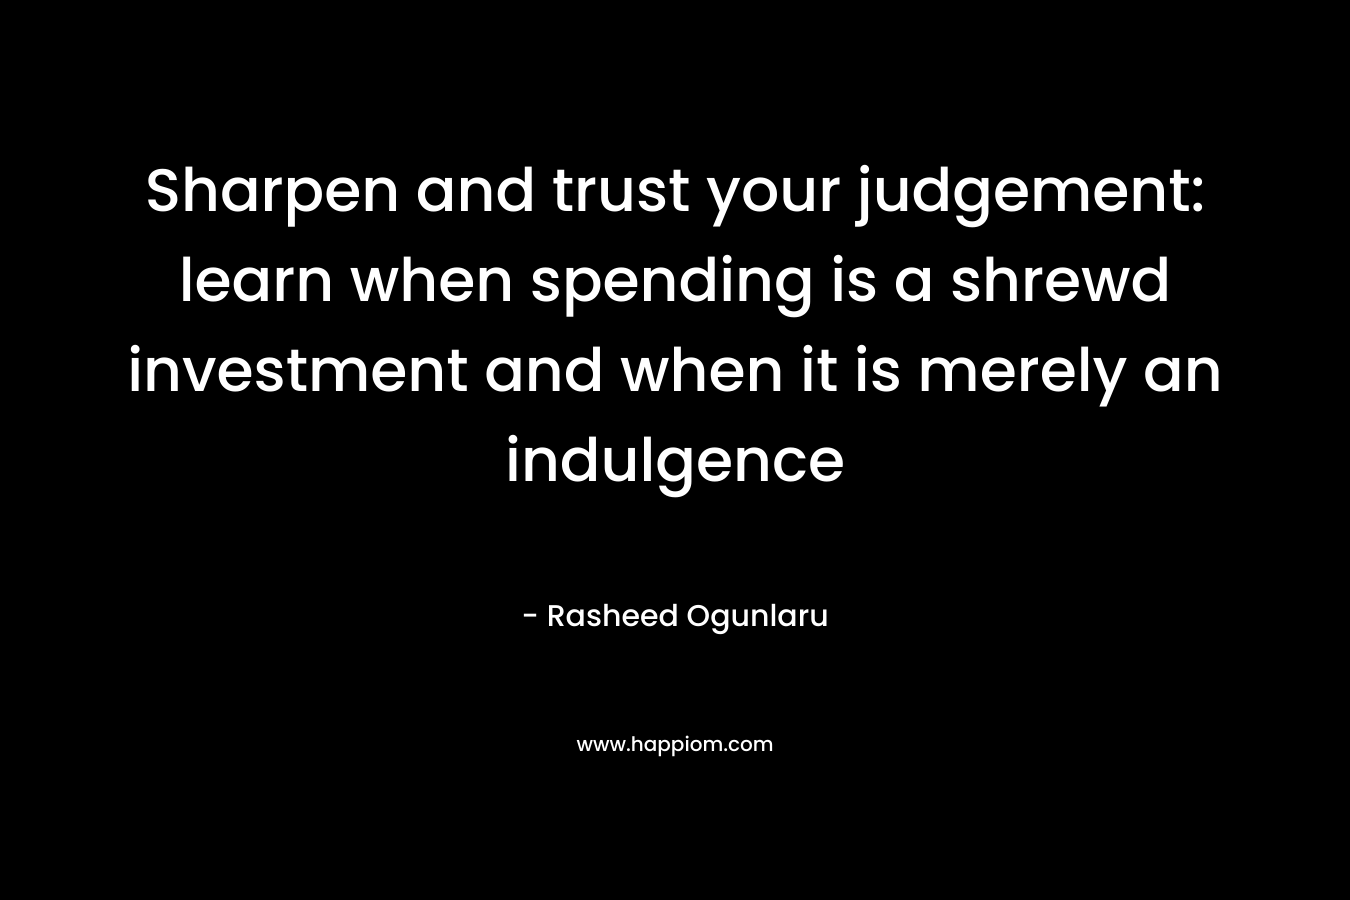 Sharpen and trust your judgement: learn when spending is a shrewd investment and when it is merely an indulgence